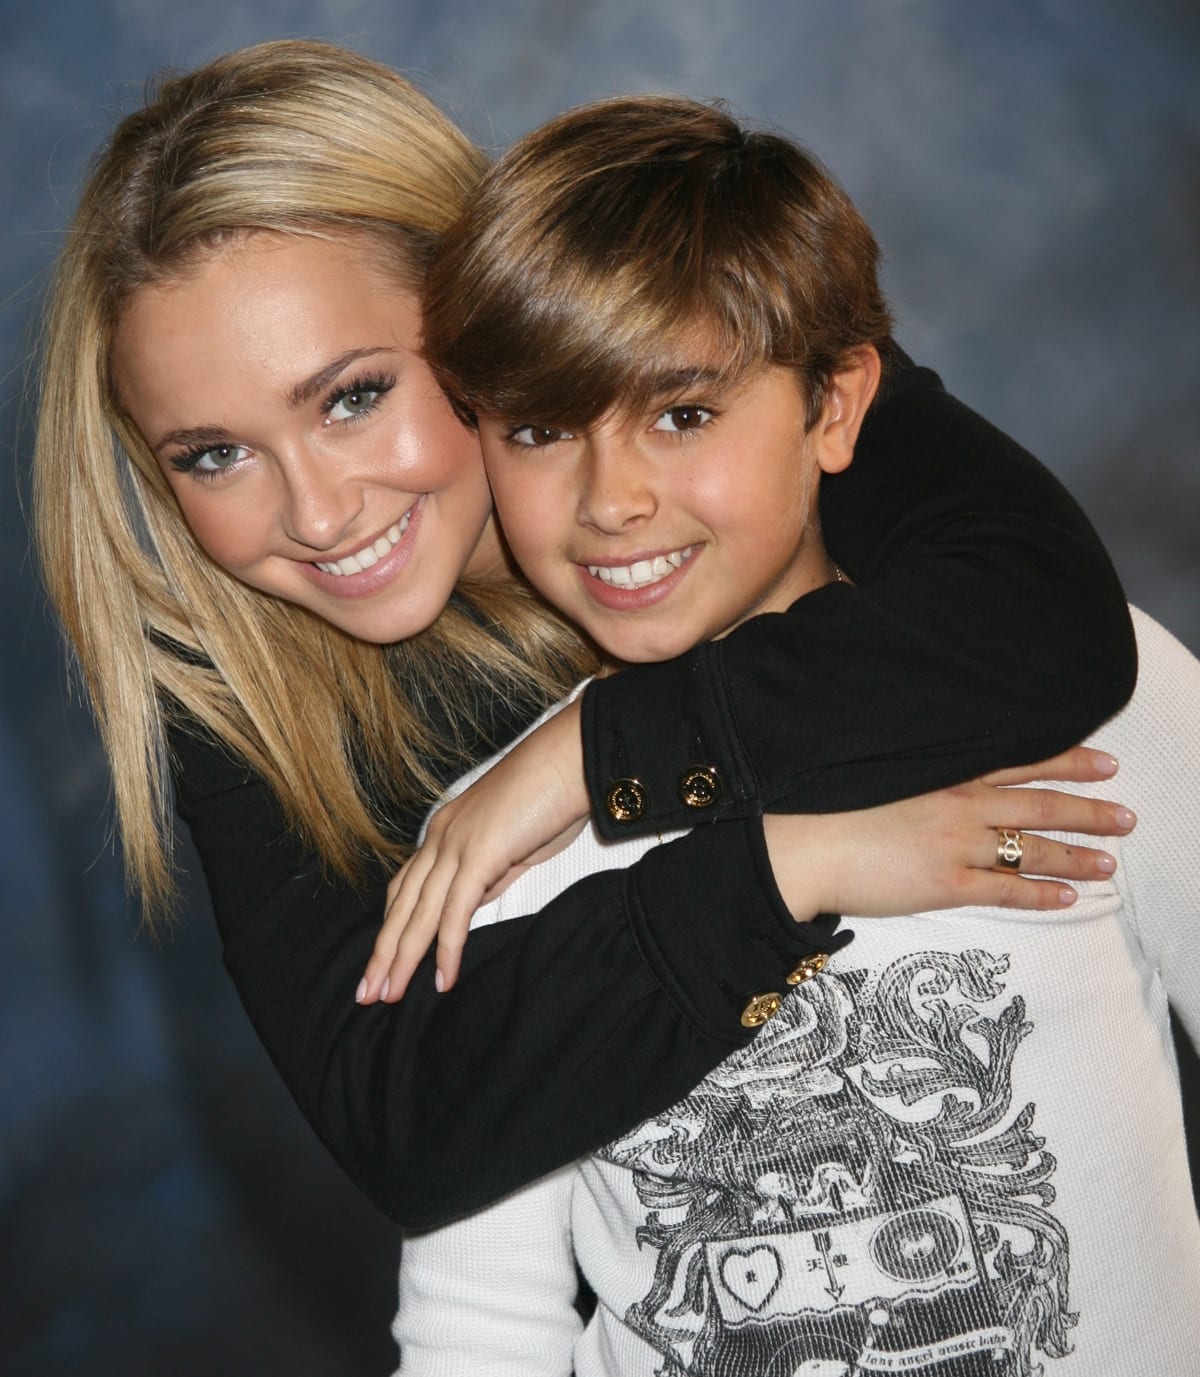 Hayden Panettiere's younger brother, Jansen Panettiere, died on February 19, 2023, at the age of 28